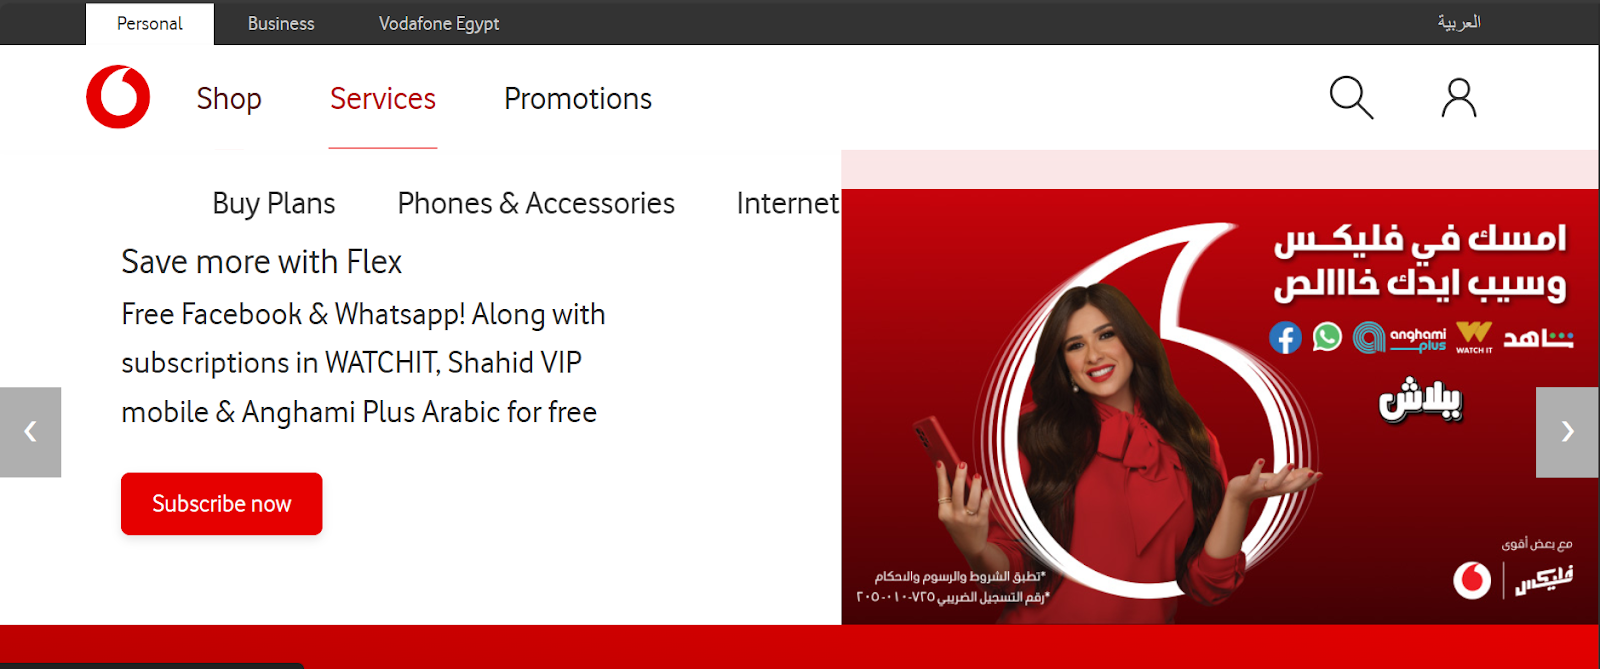 Vodafone Egypt website snapshot highlighting the services it offers.
